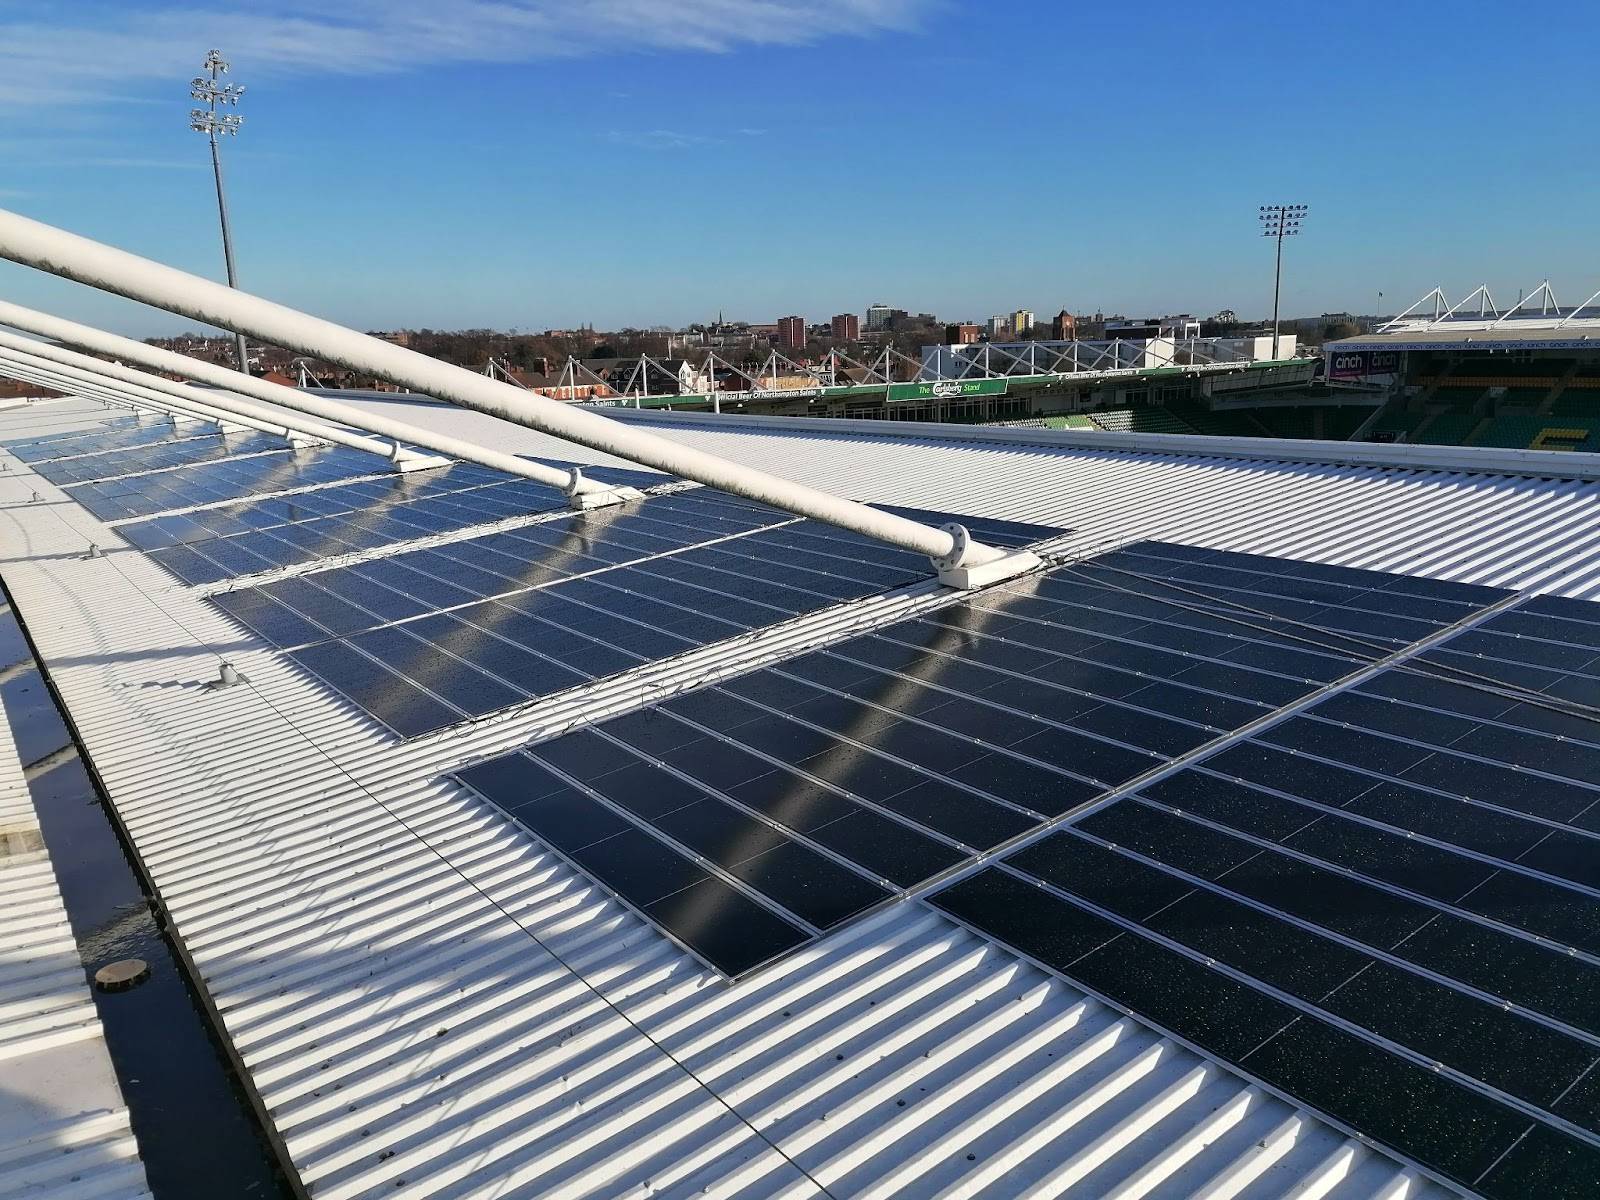 Premiership Rugby Club to save £250K through clean energy generating roof panels